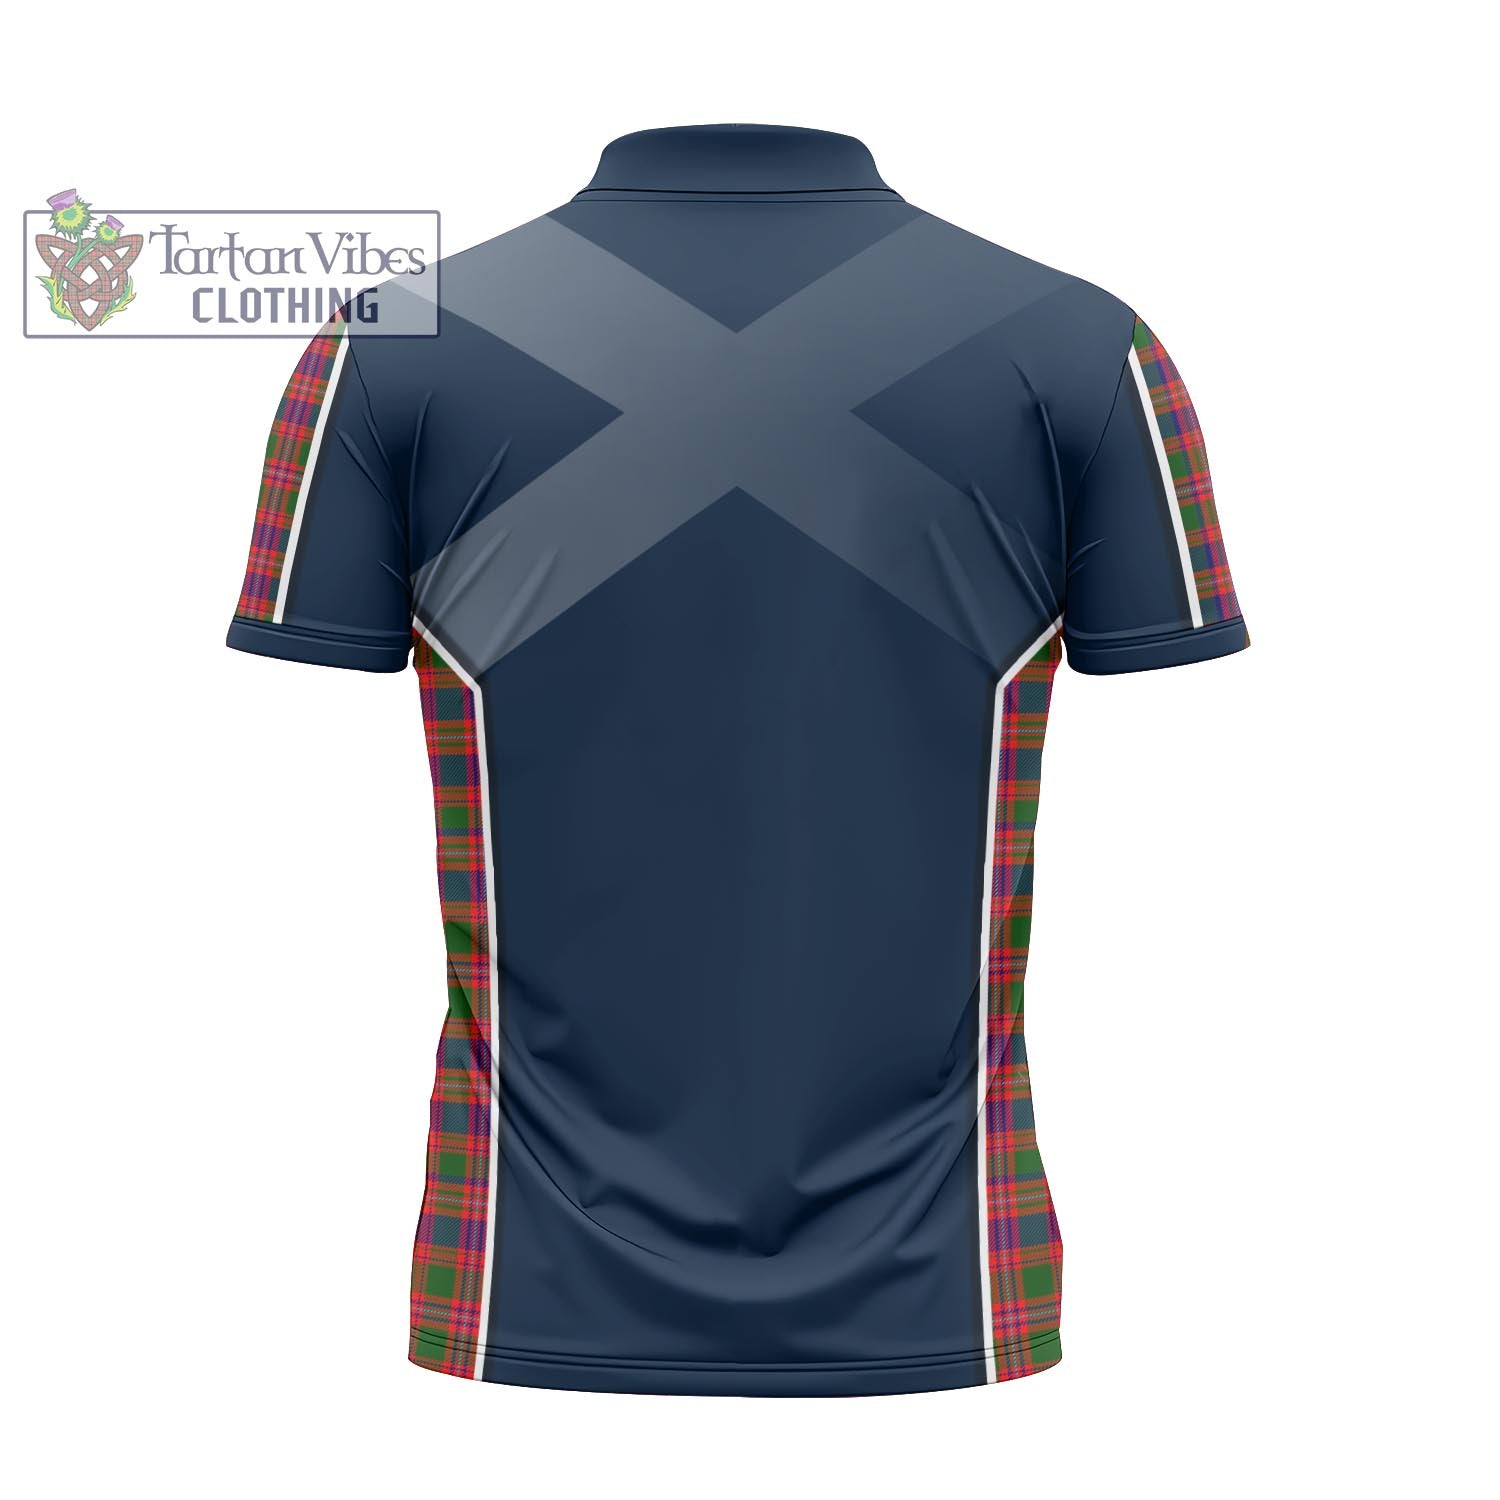 Tartan Vibes Clothing MacIntyre Modern Tartan Zipper Polo Shirt with Family Crest and Scottish Thistle Vibes Sport Style